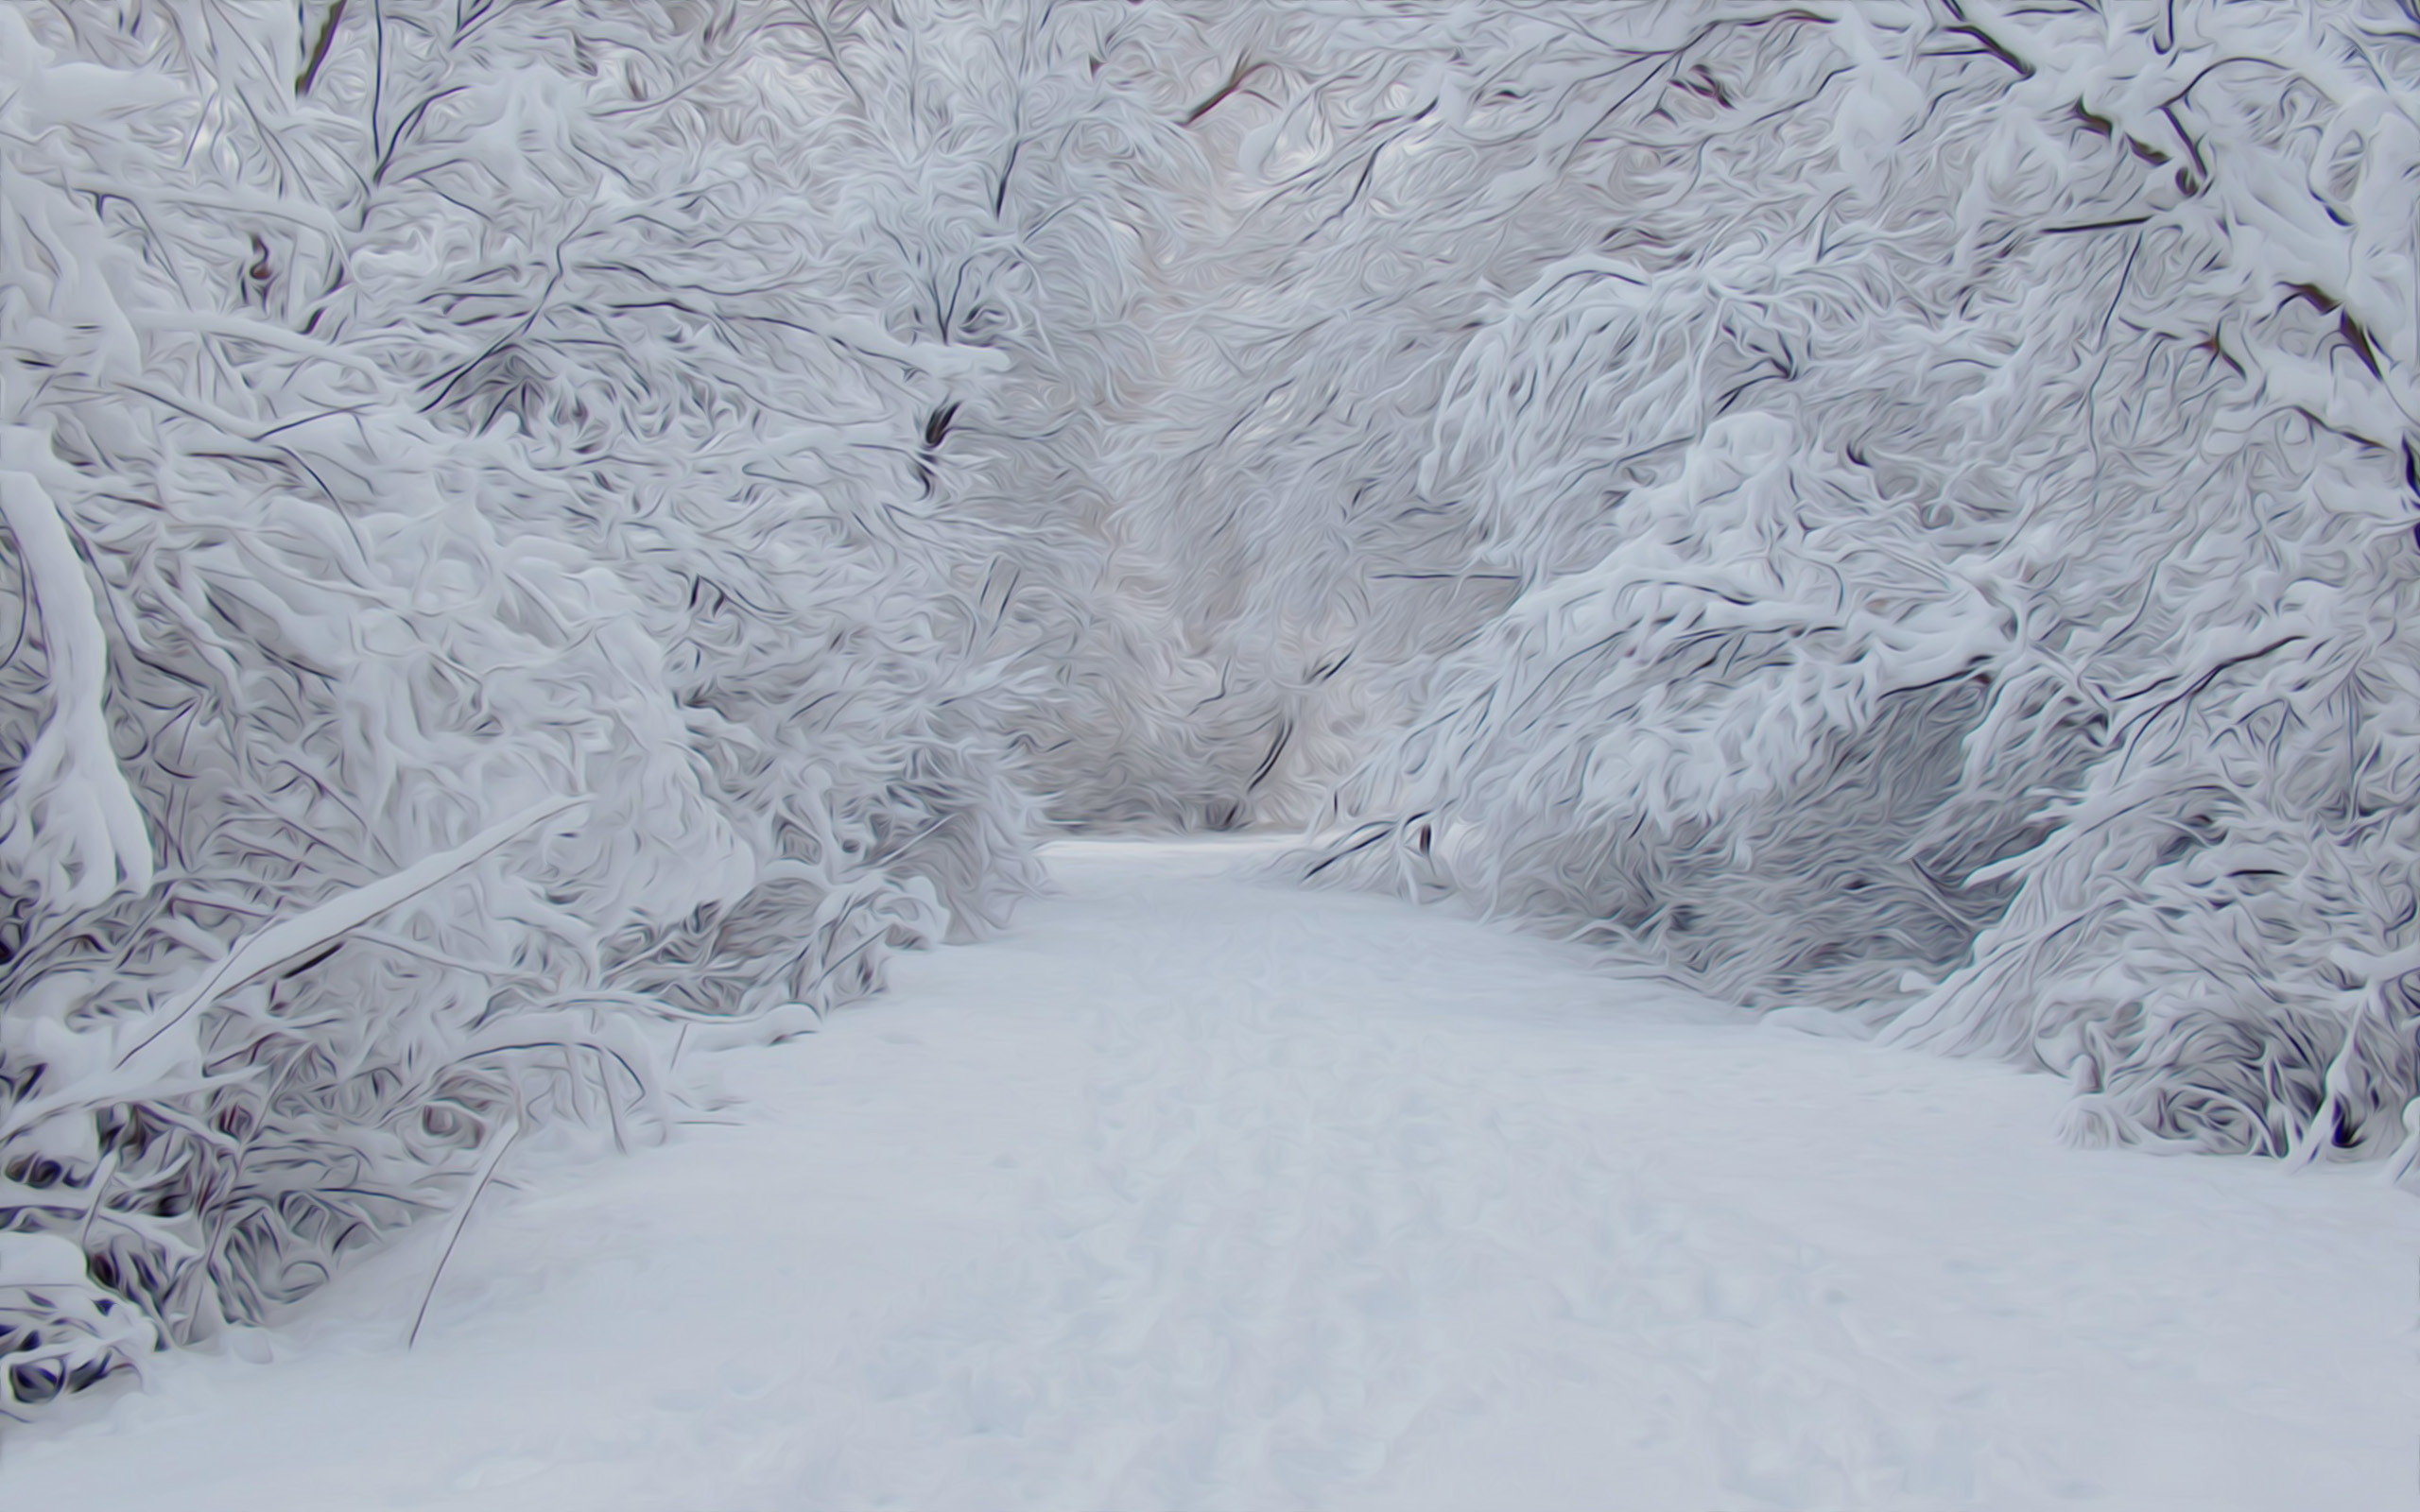 2560x1600 Winter images snowy snow HD wallpaper and background photos (34209346)